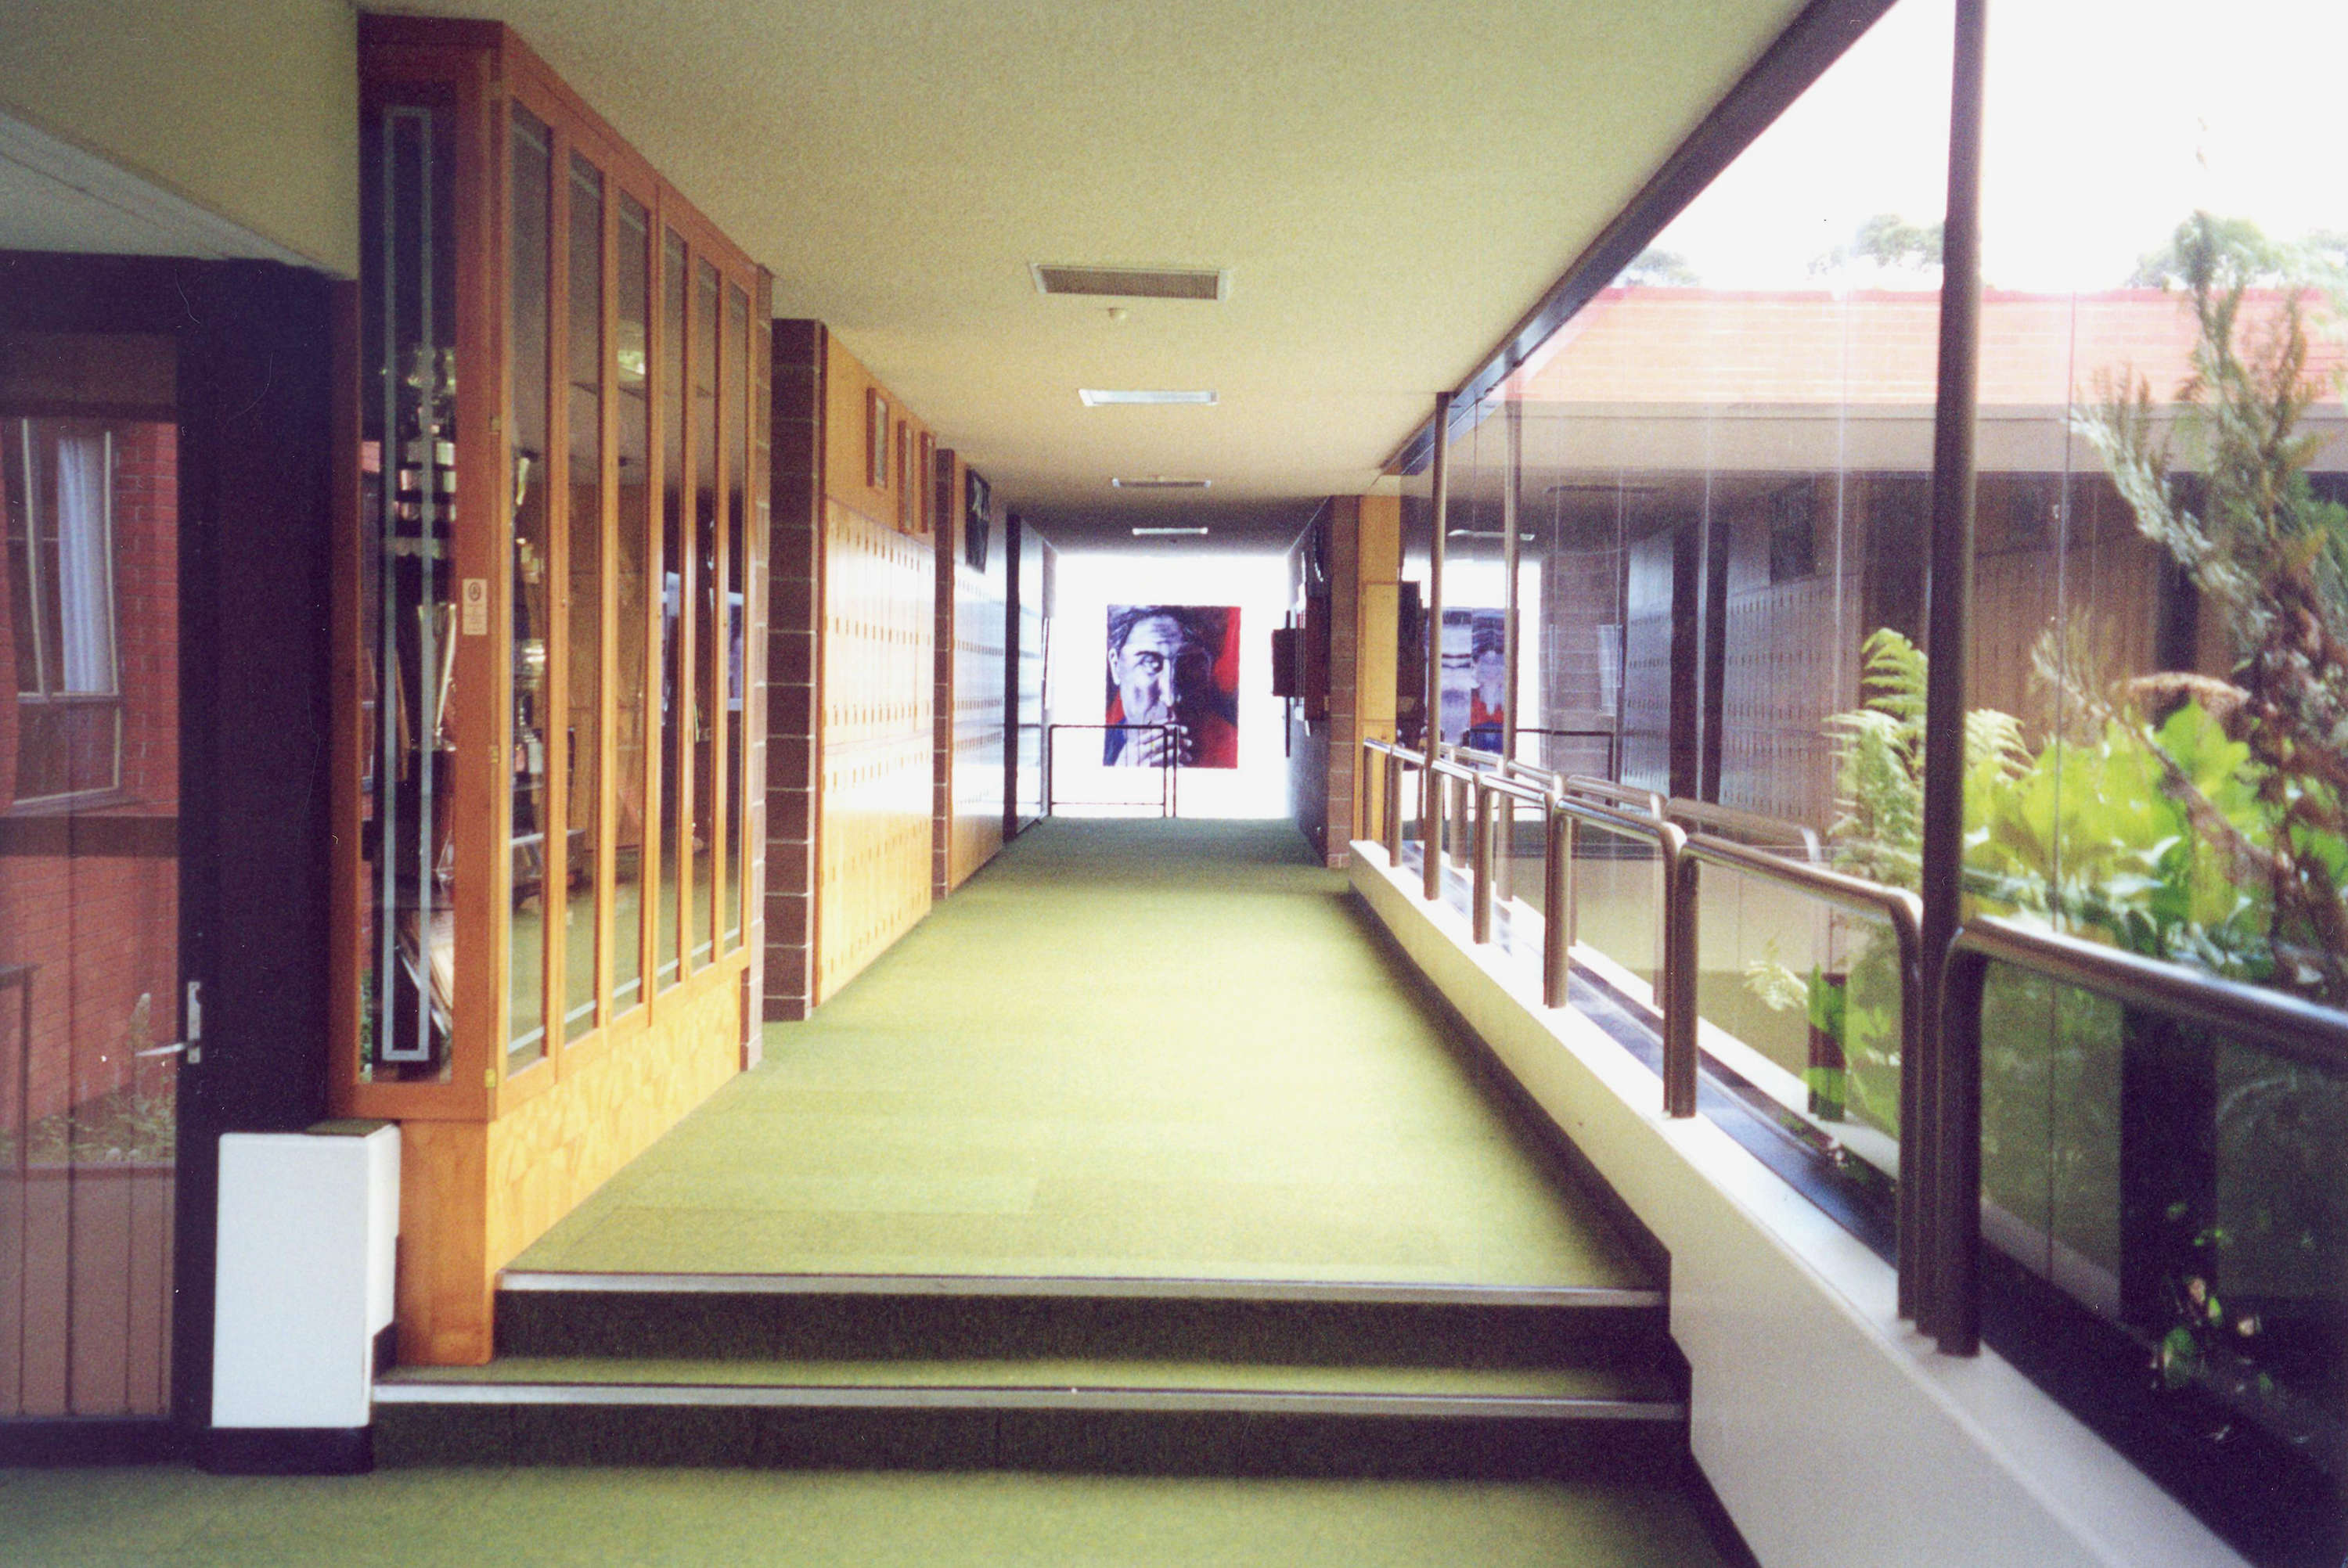 Corridor to Ray Vincent Wing, c2001.